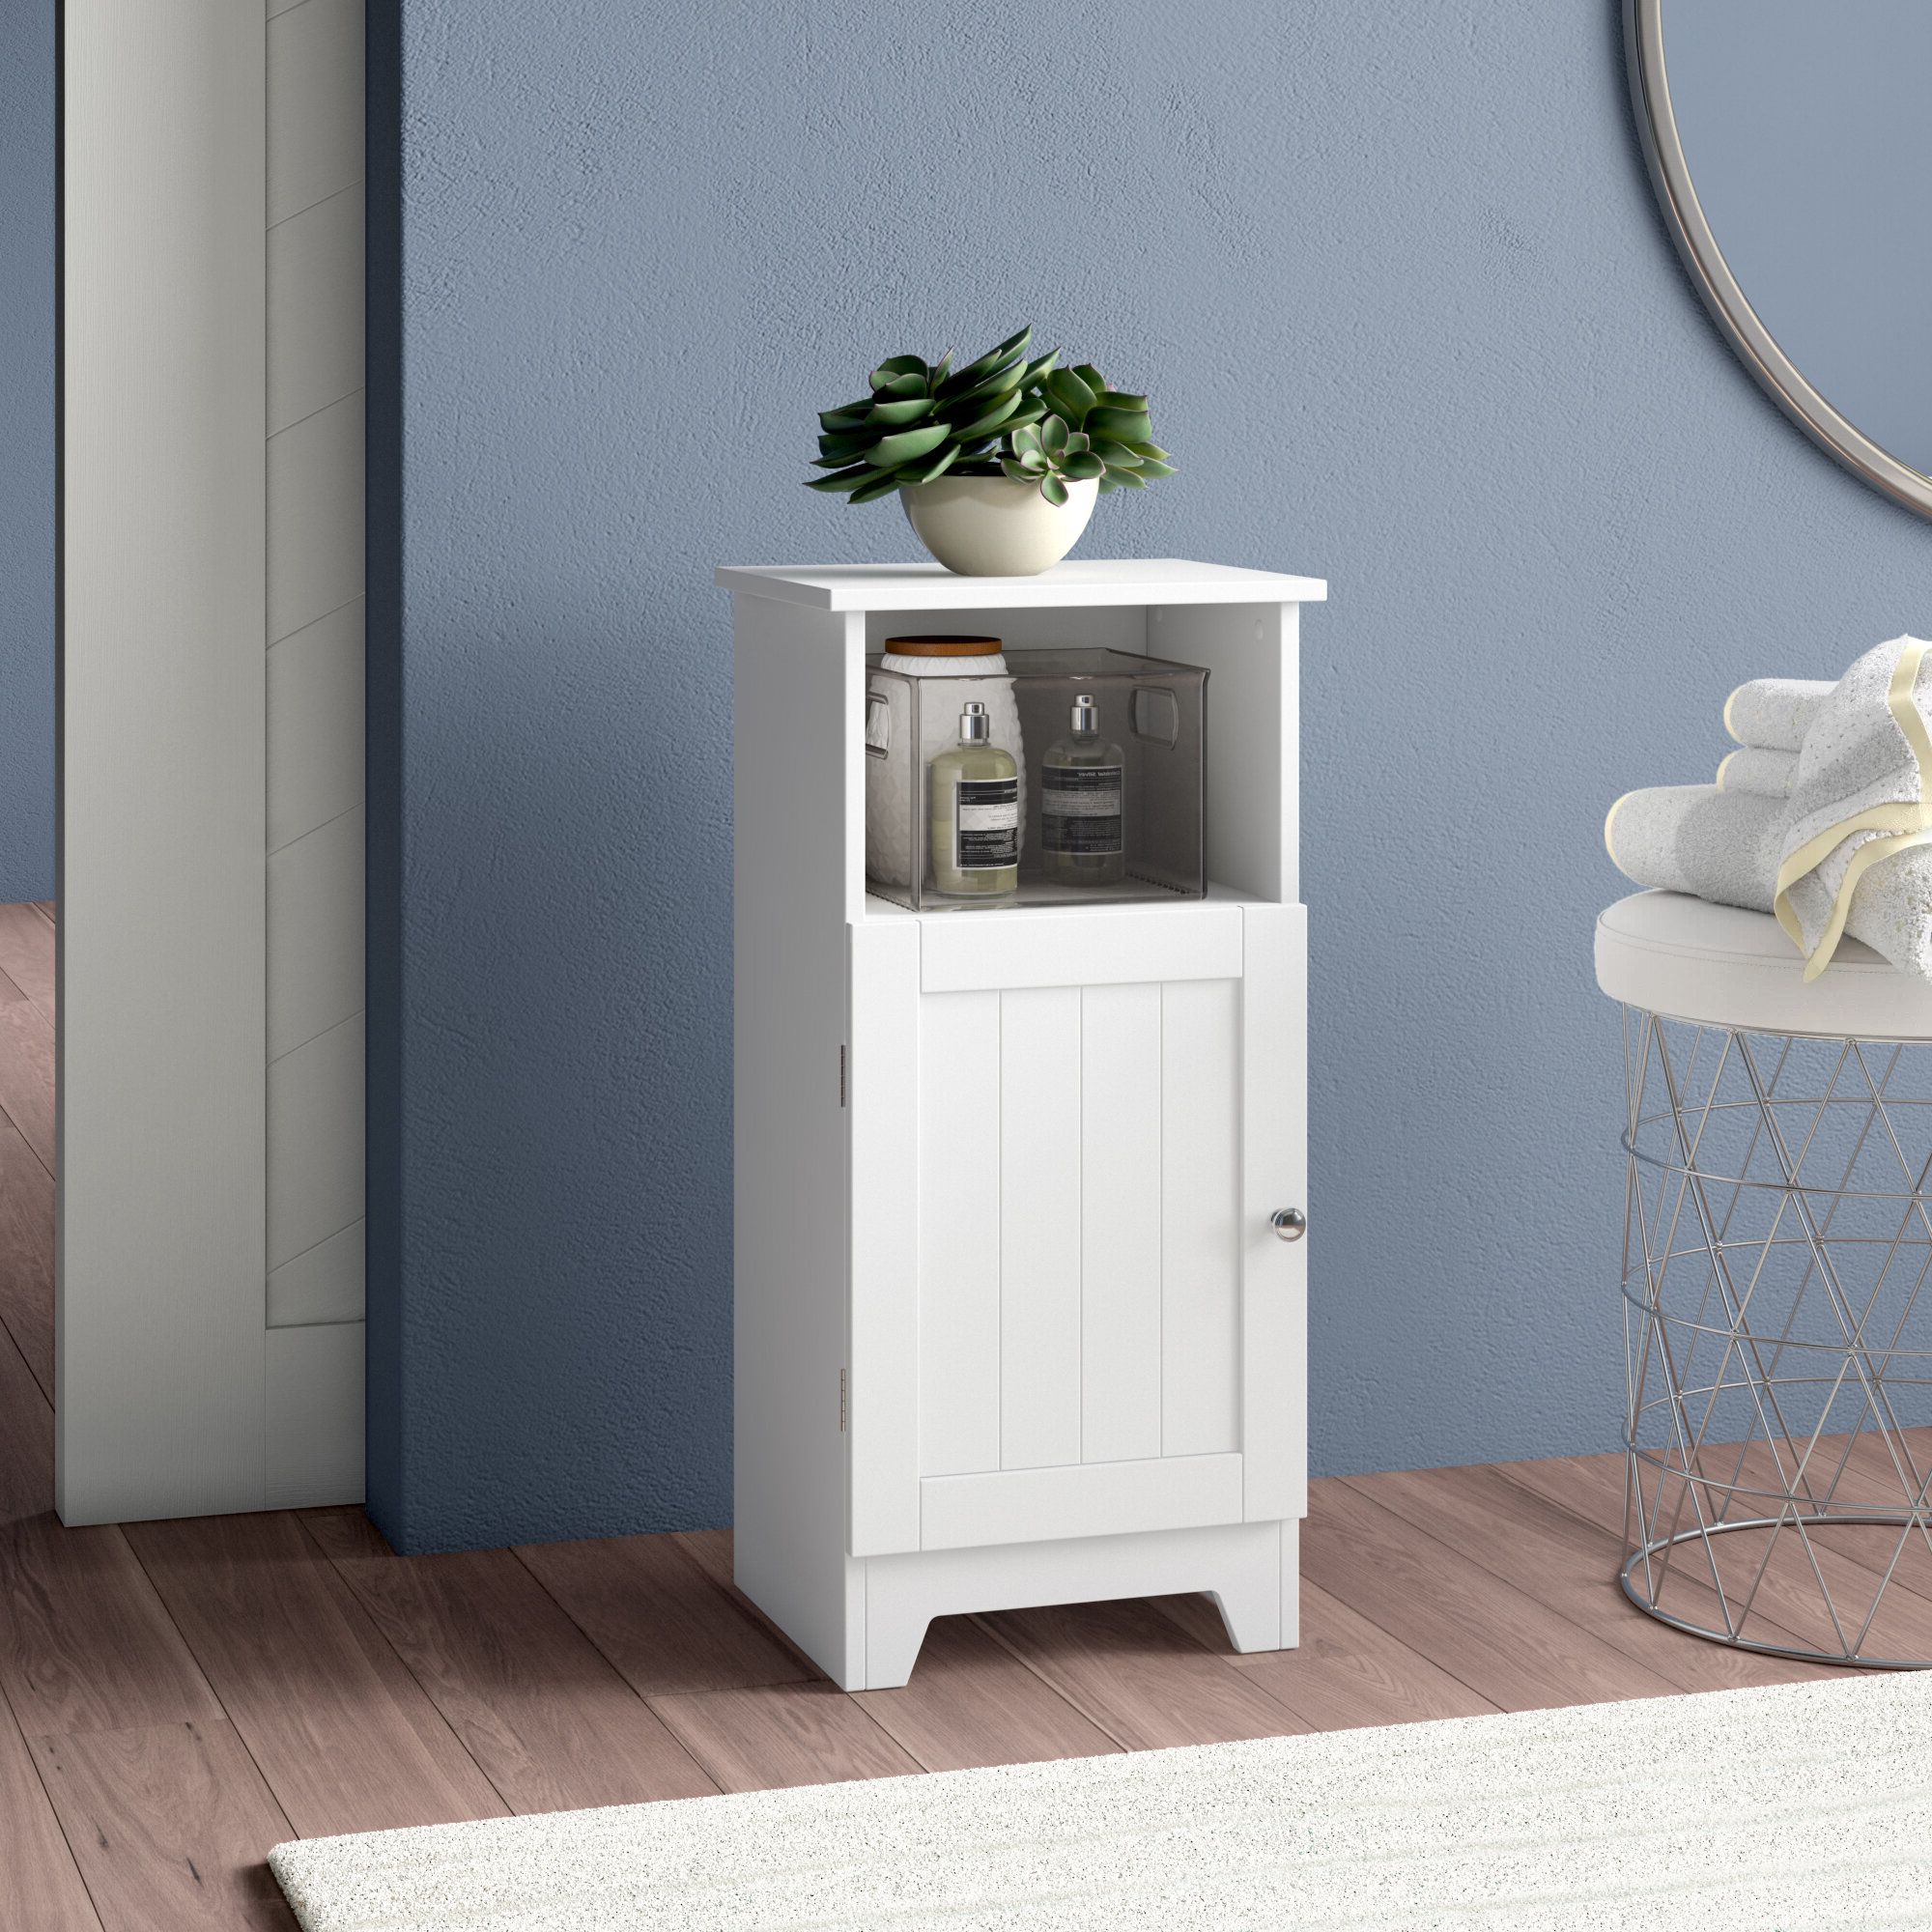 Rebrilliant Freestanding Bathroom Cabinet & Reviews | Wayfair For Freestanding Tables With Drawers (Gallery 17 of 20)